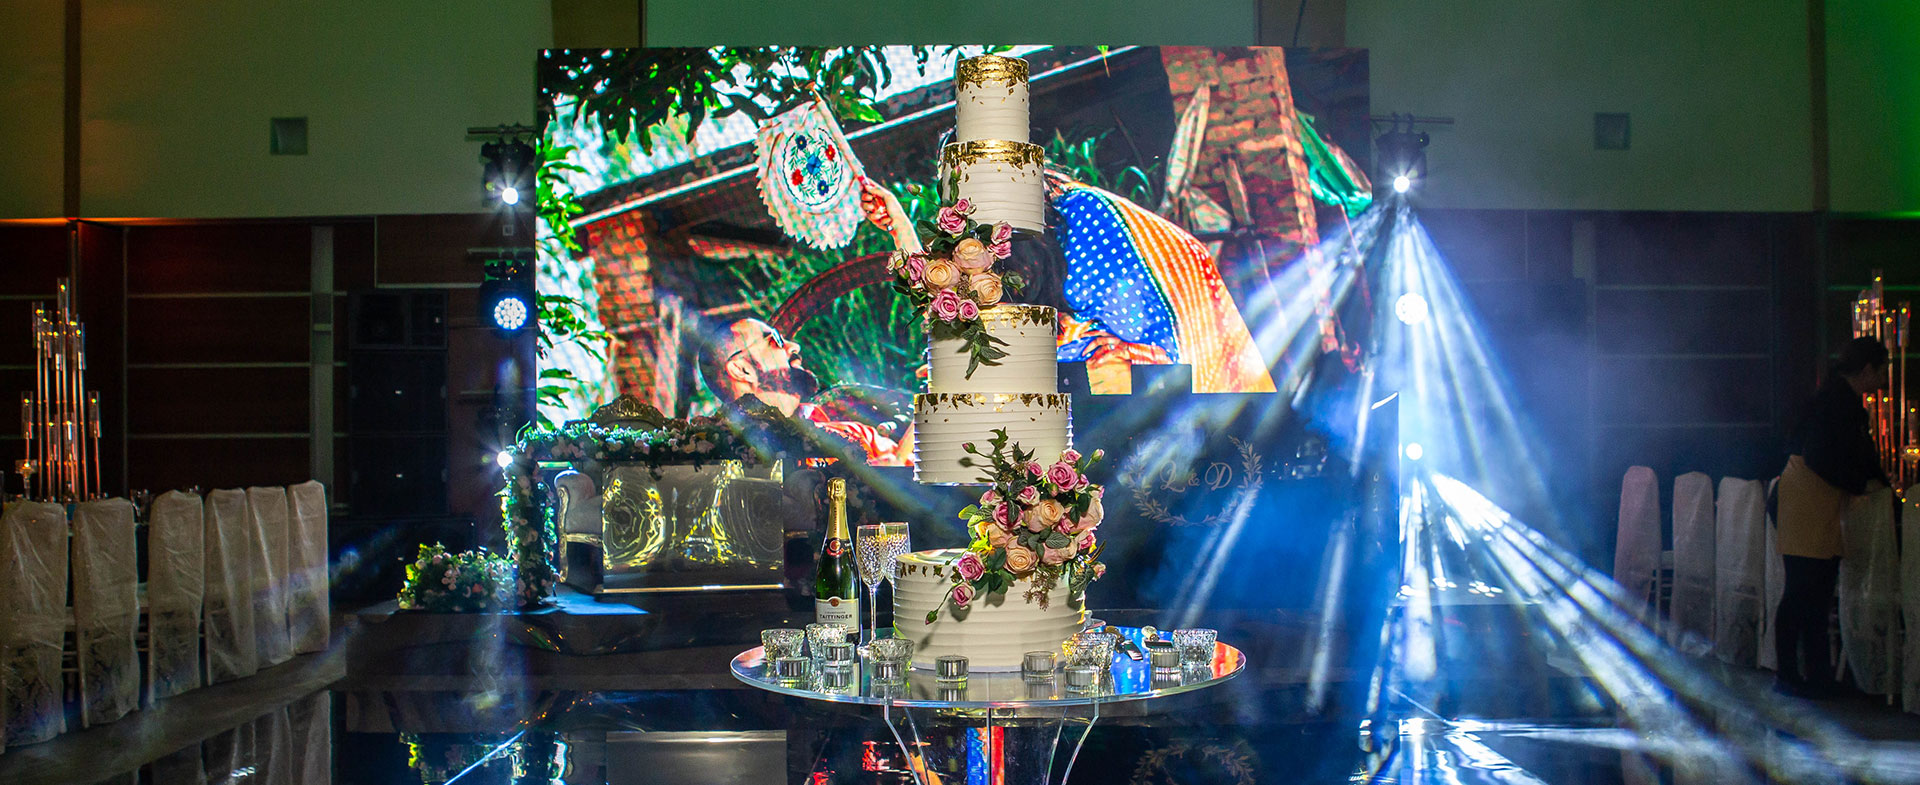 7 Tier Side Floating Wedding Cake with Florals Full